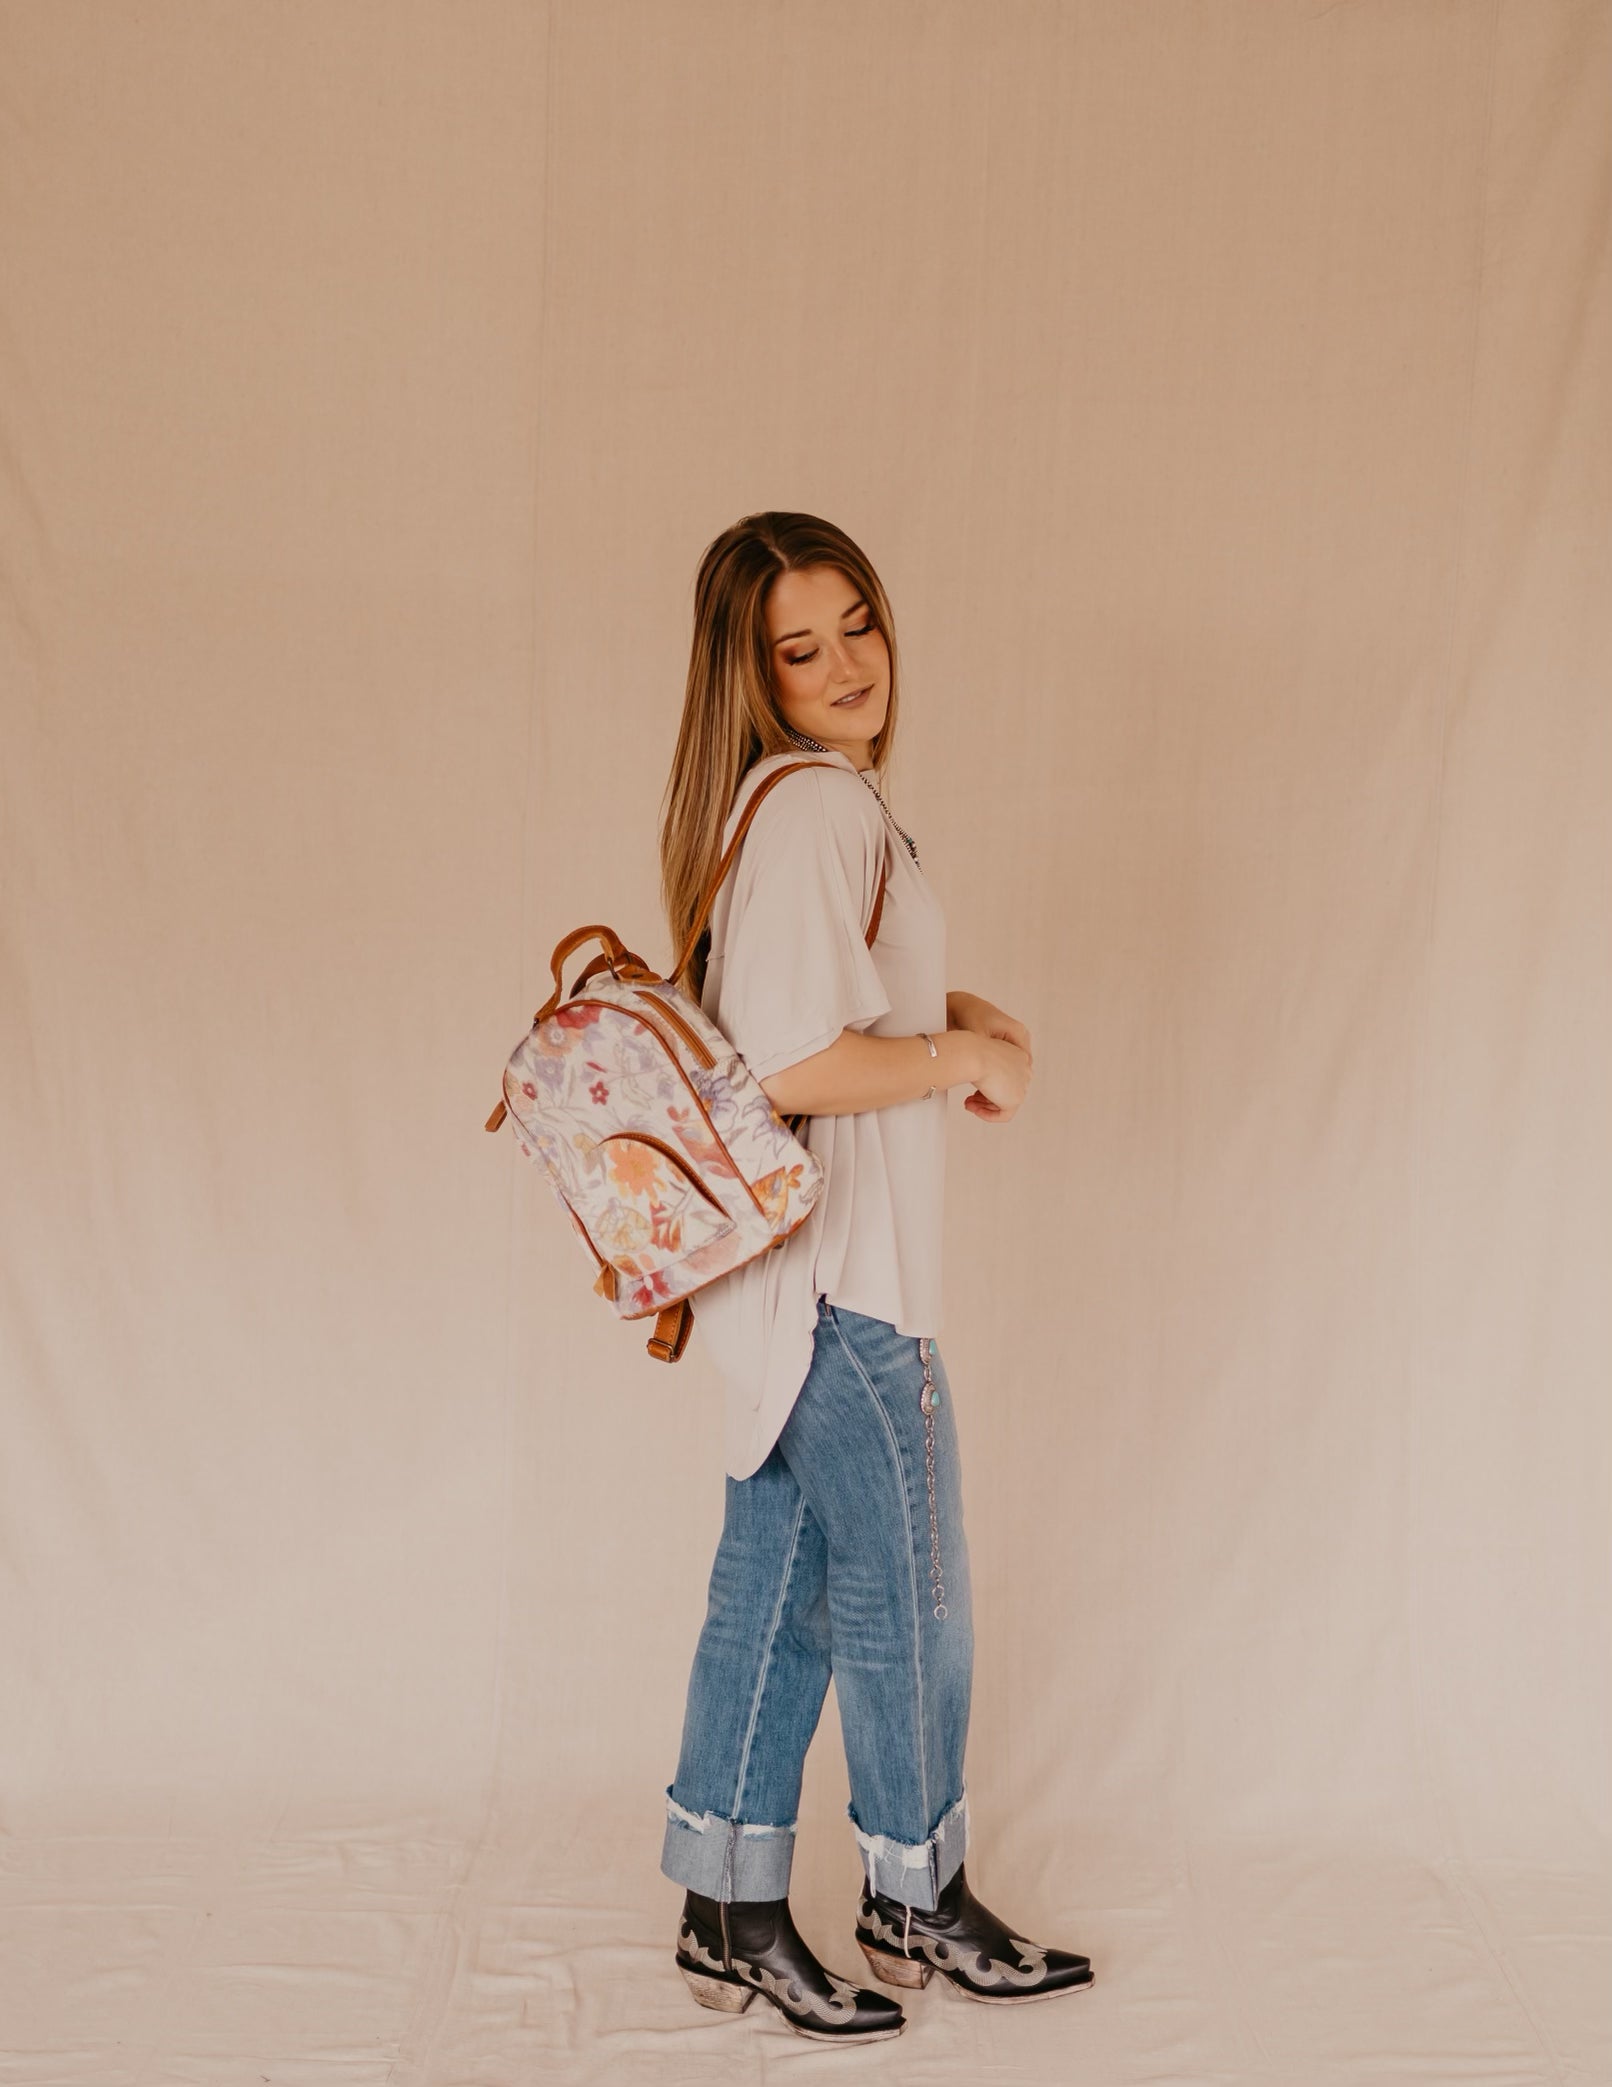 The Reavlee Floral Backpack